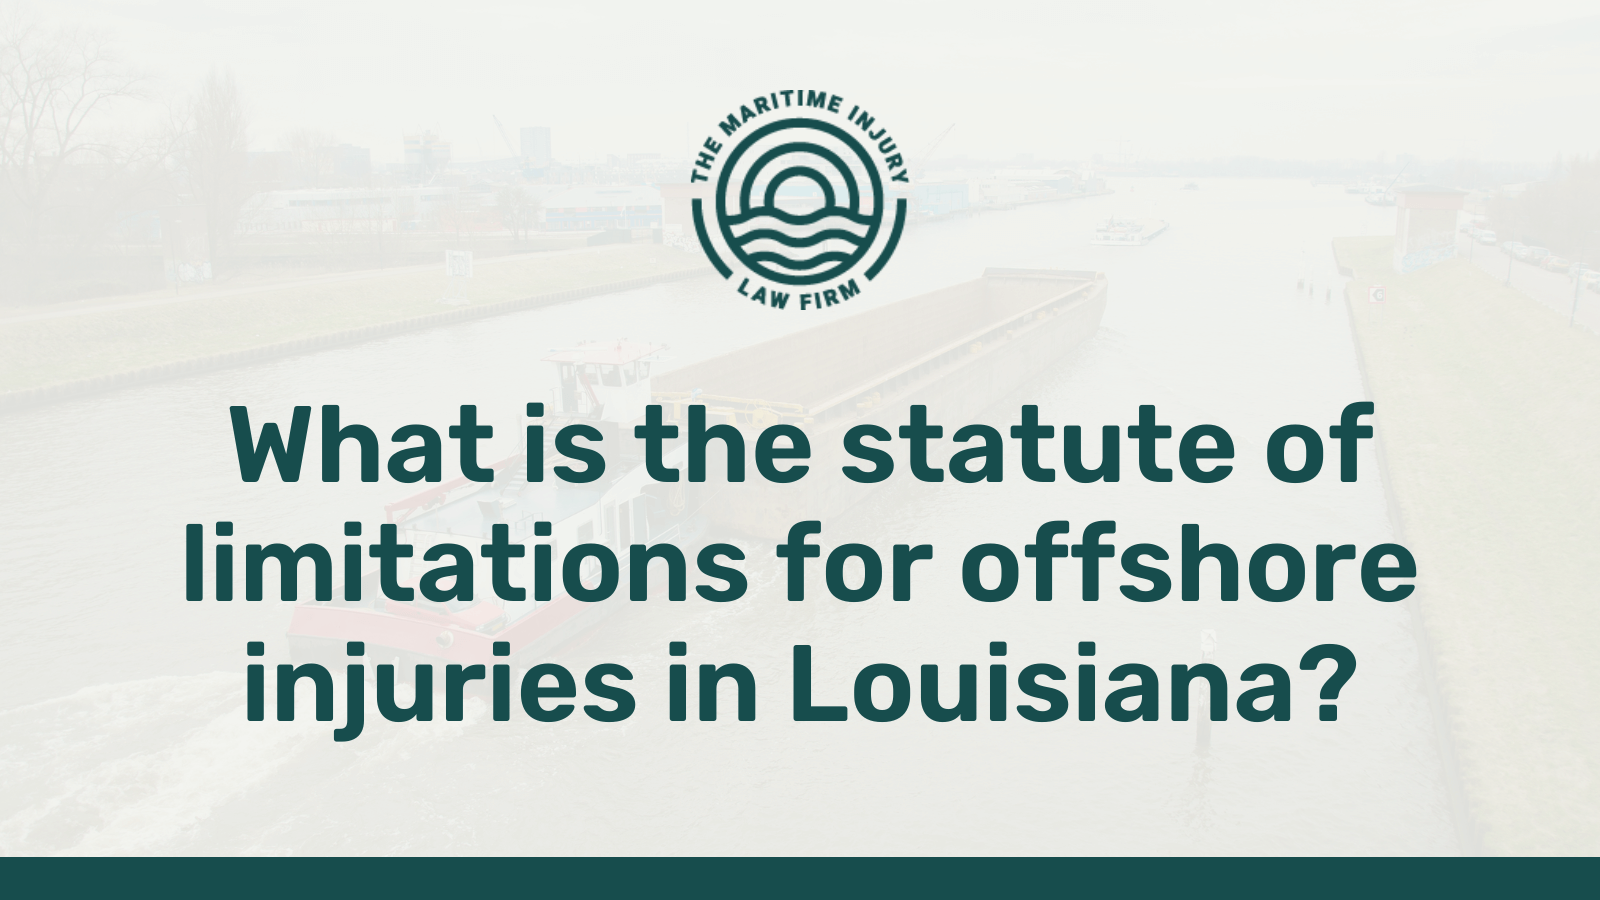 What is the statute of limitations for offshore injuries in Louisiana - maritime injury law firm - George Vourvoulias